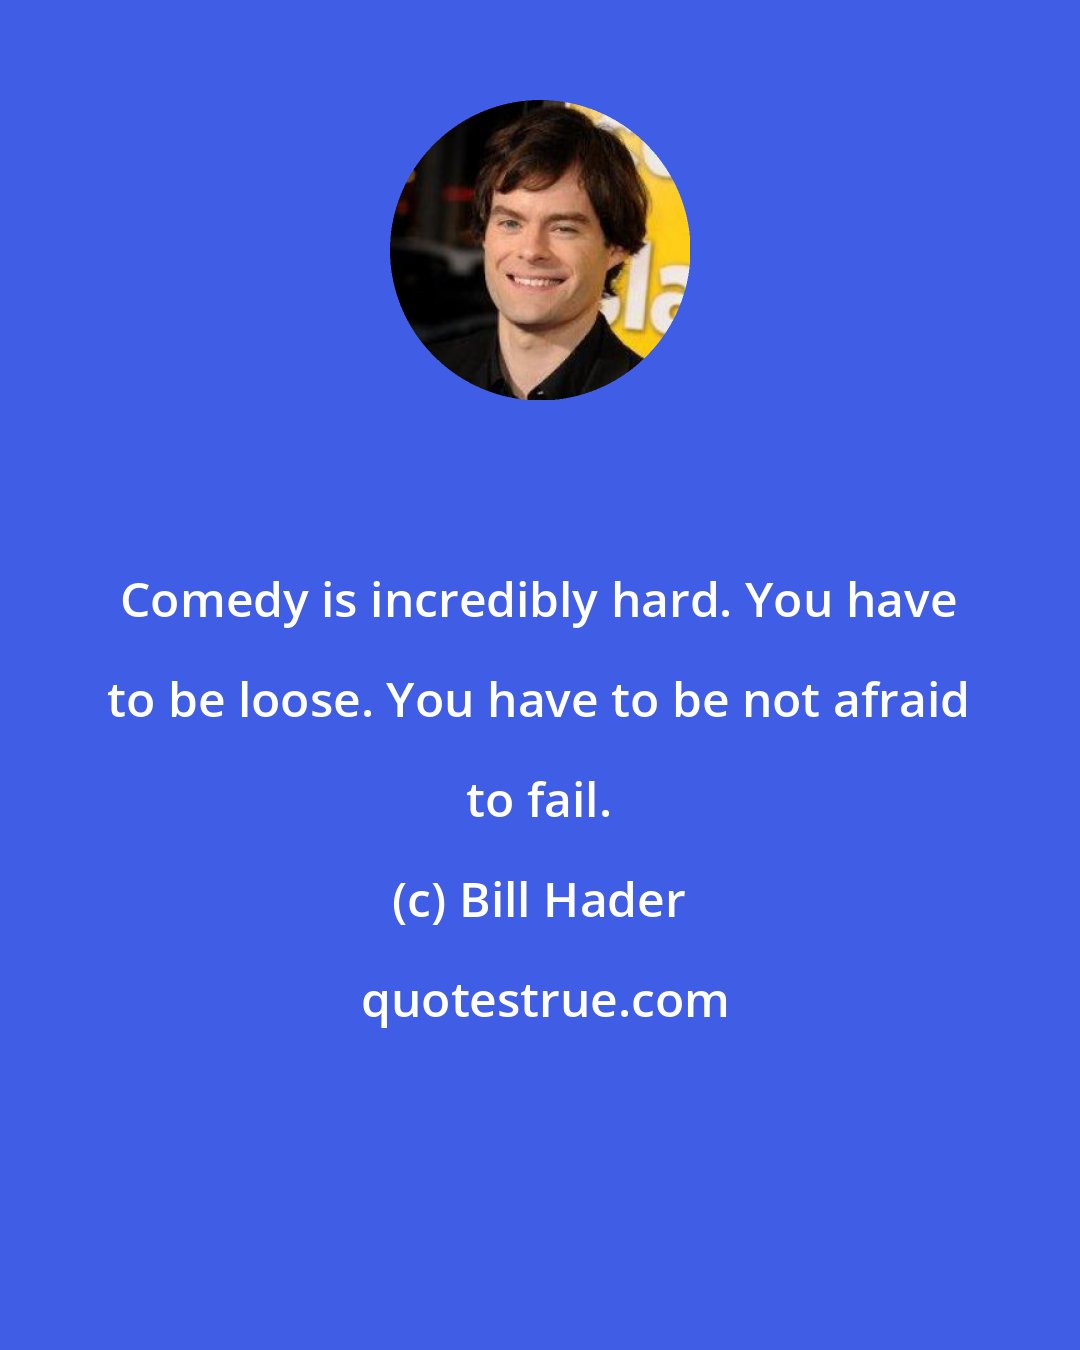 Bill Hader: Comedy is incredibly hard. You have to be loose. You have to be not afraid to fail.